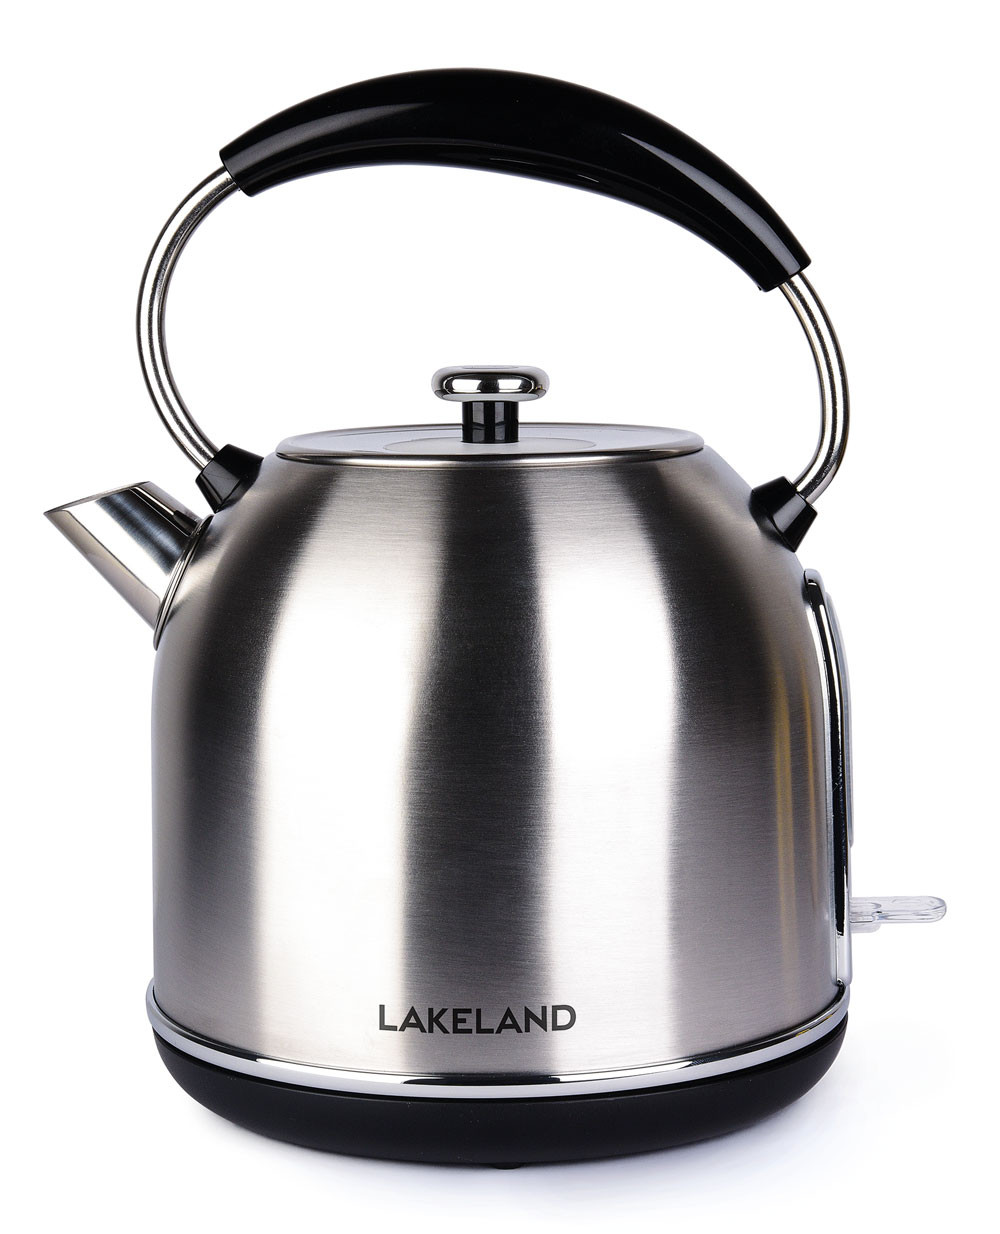 Lakeland Stainless Steel Traditional Kettle 1.7L featured image